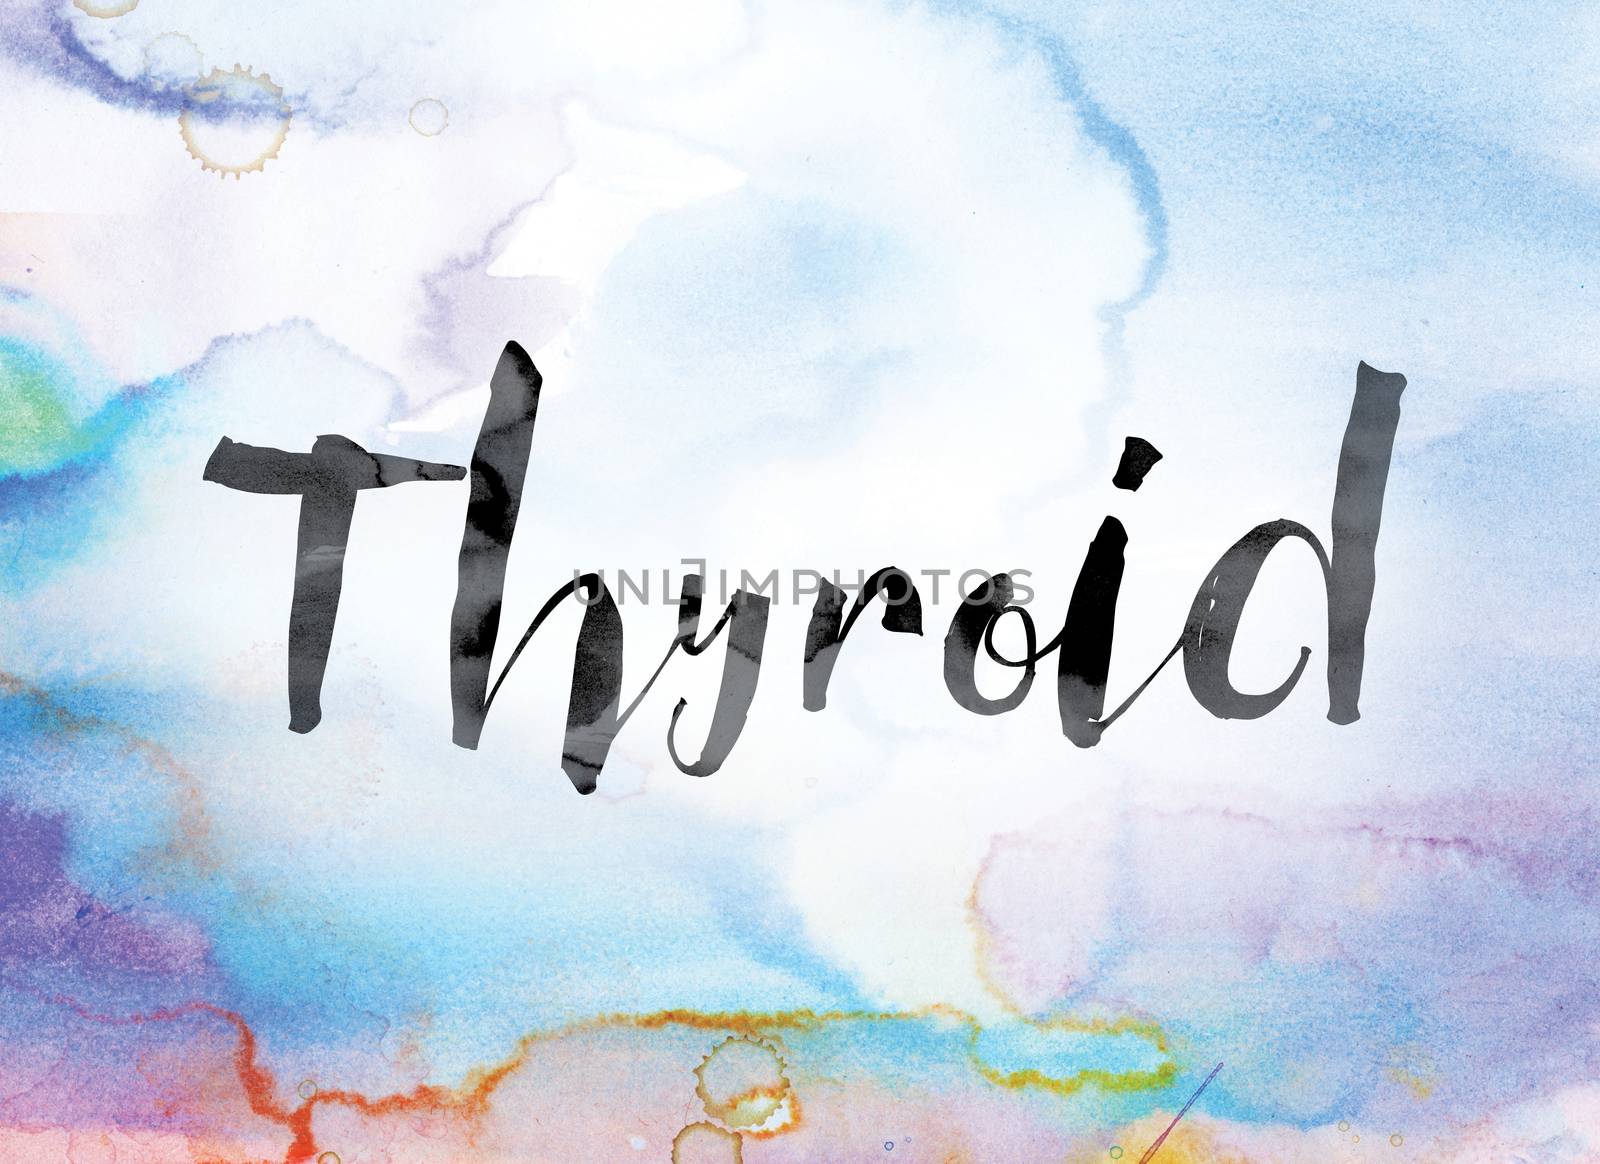 The word "Thyroid" painted in black ink over a colorful watercolor washed background concept and theme.